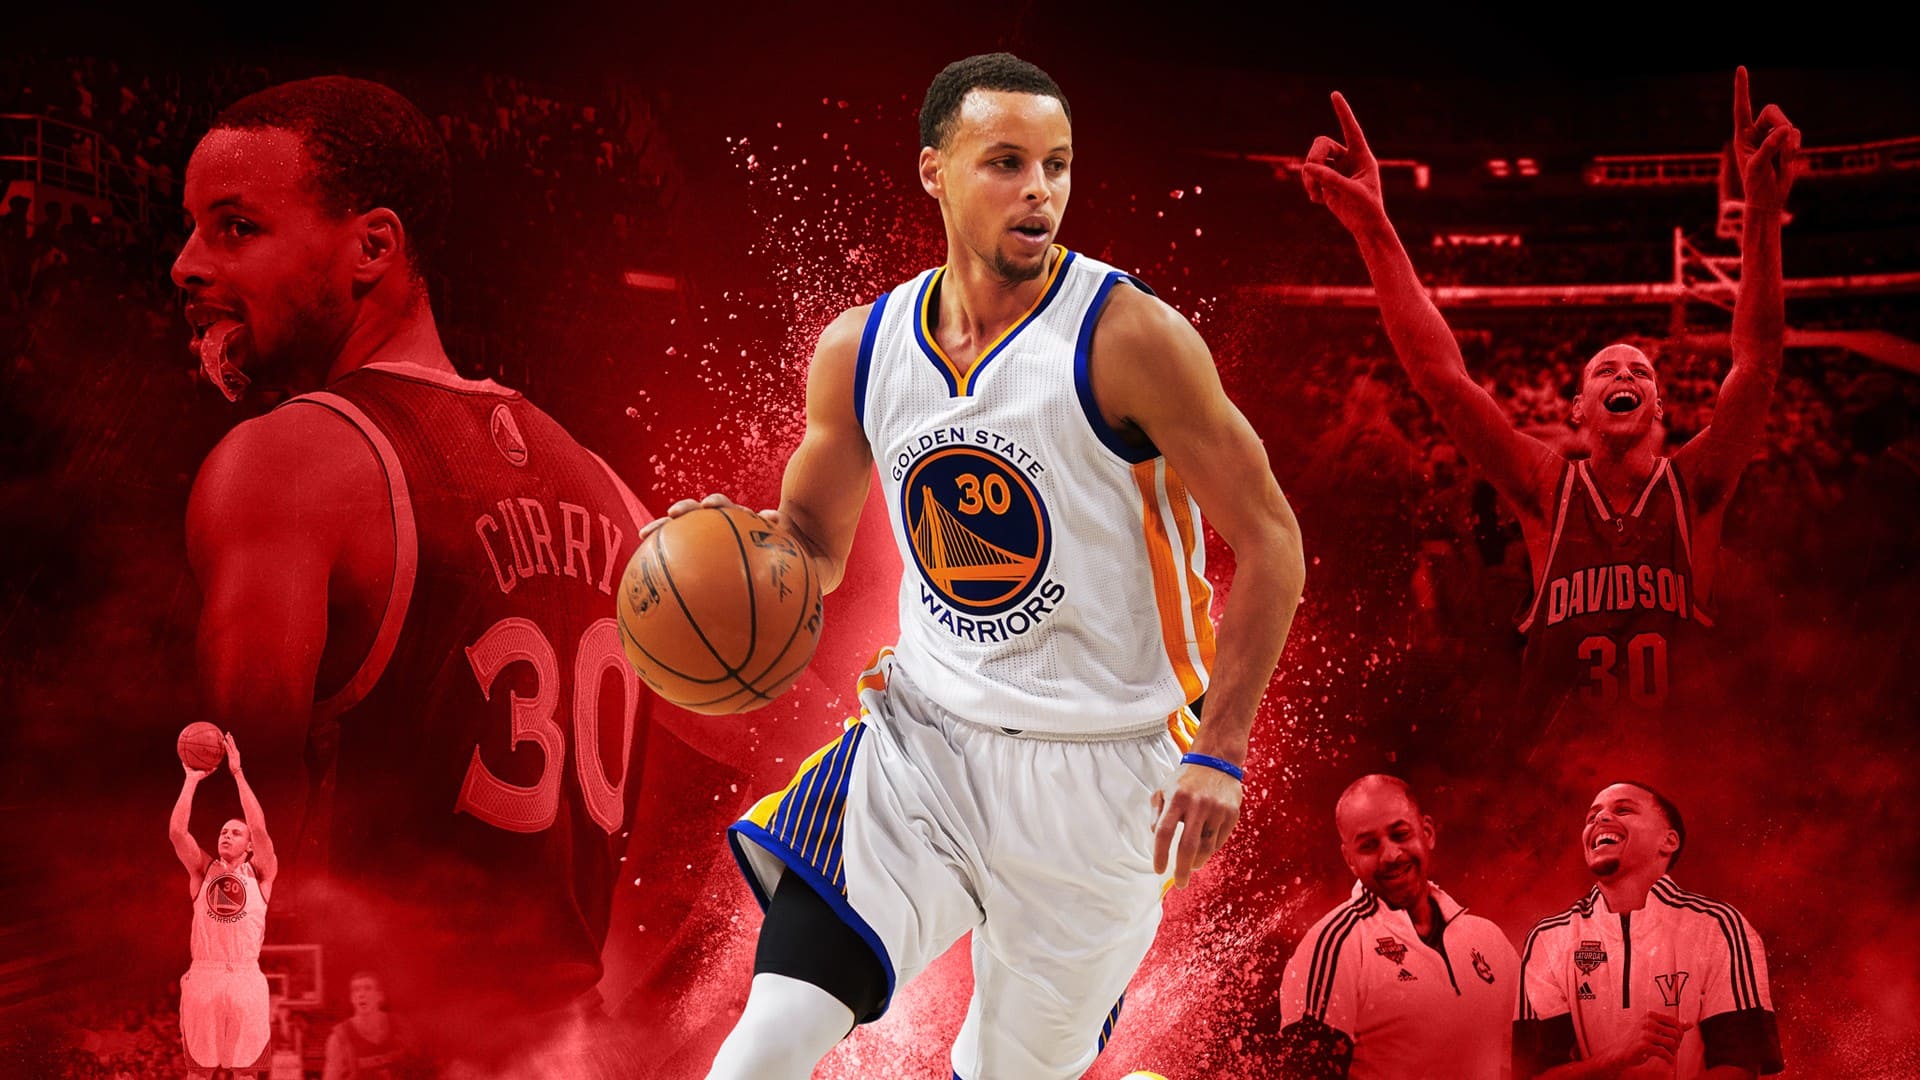 Cool Stephen Curry HD Wallpaper 